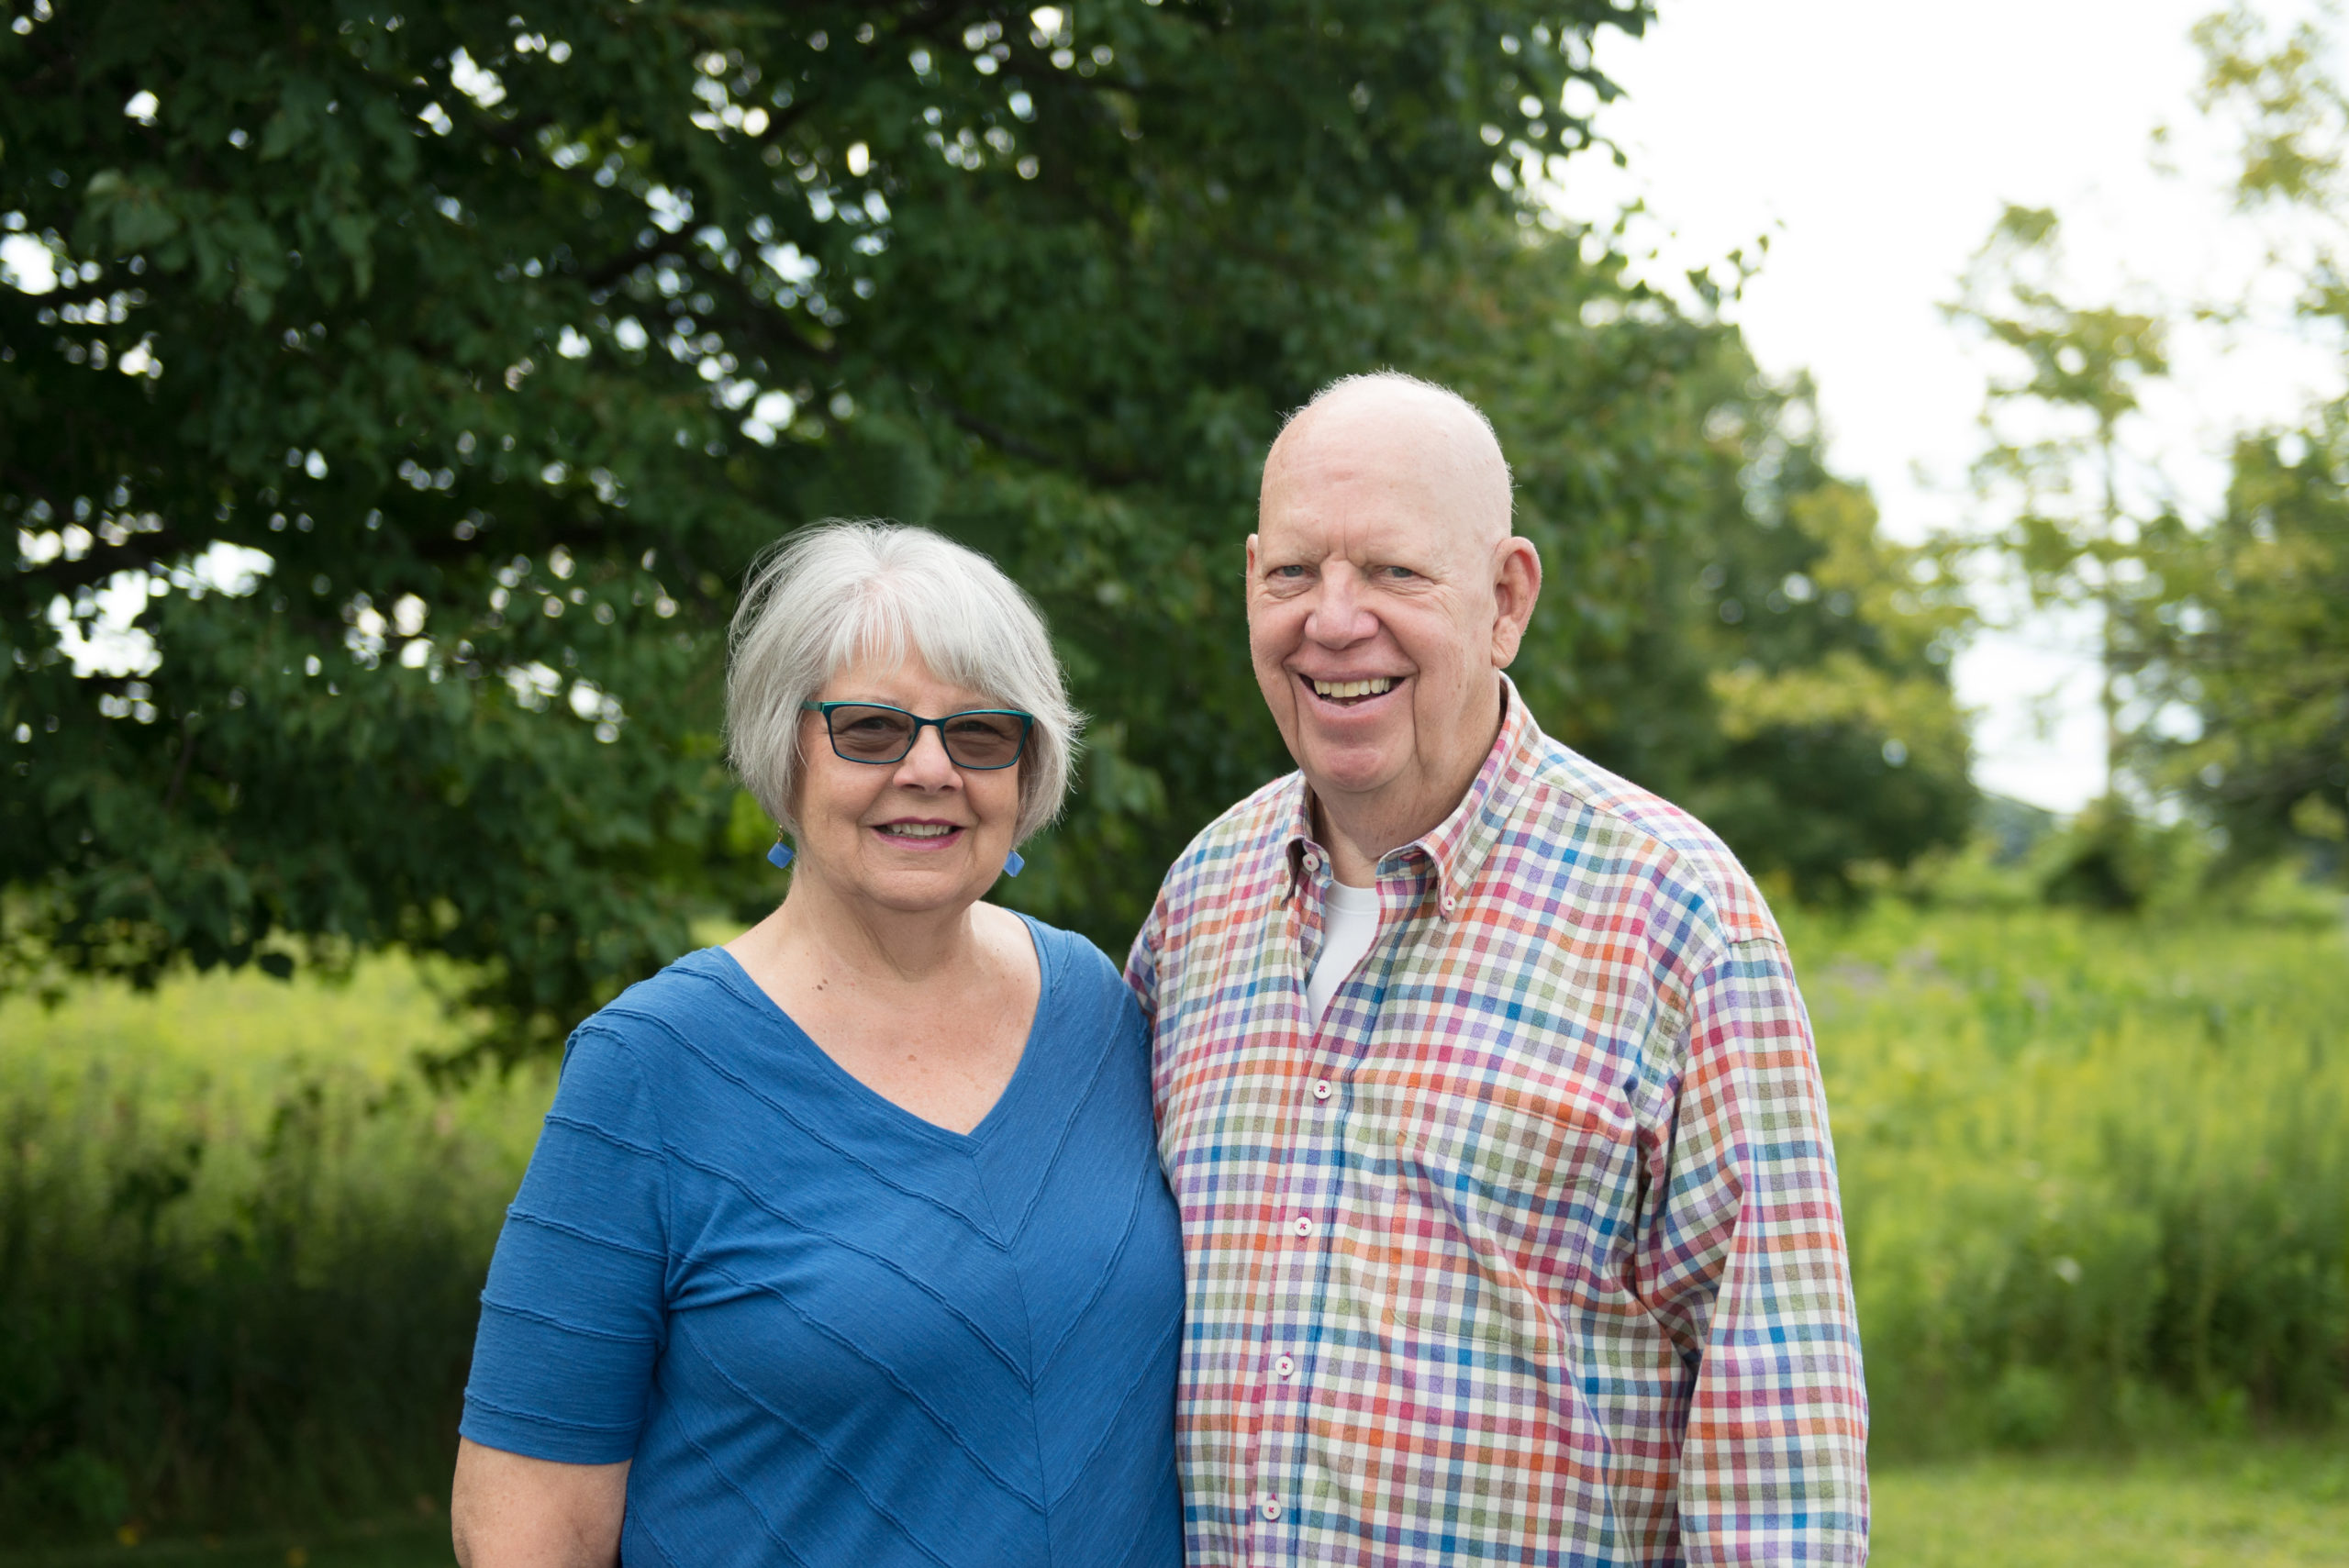 Don and Ann Bont